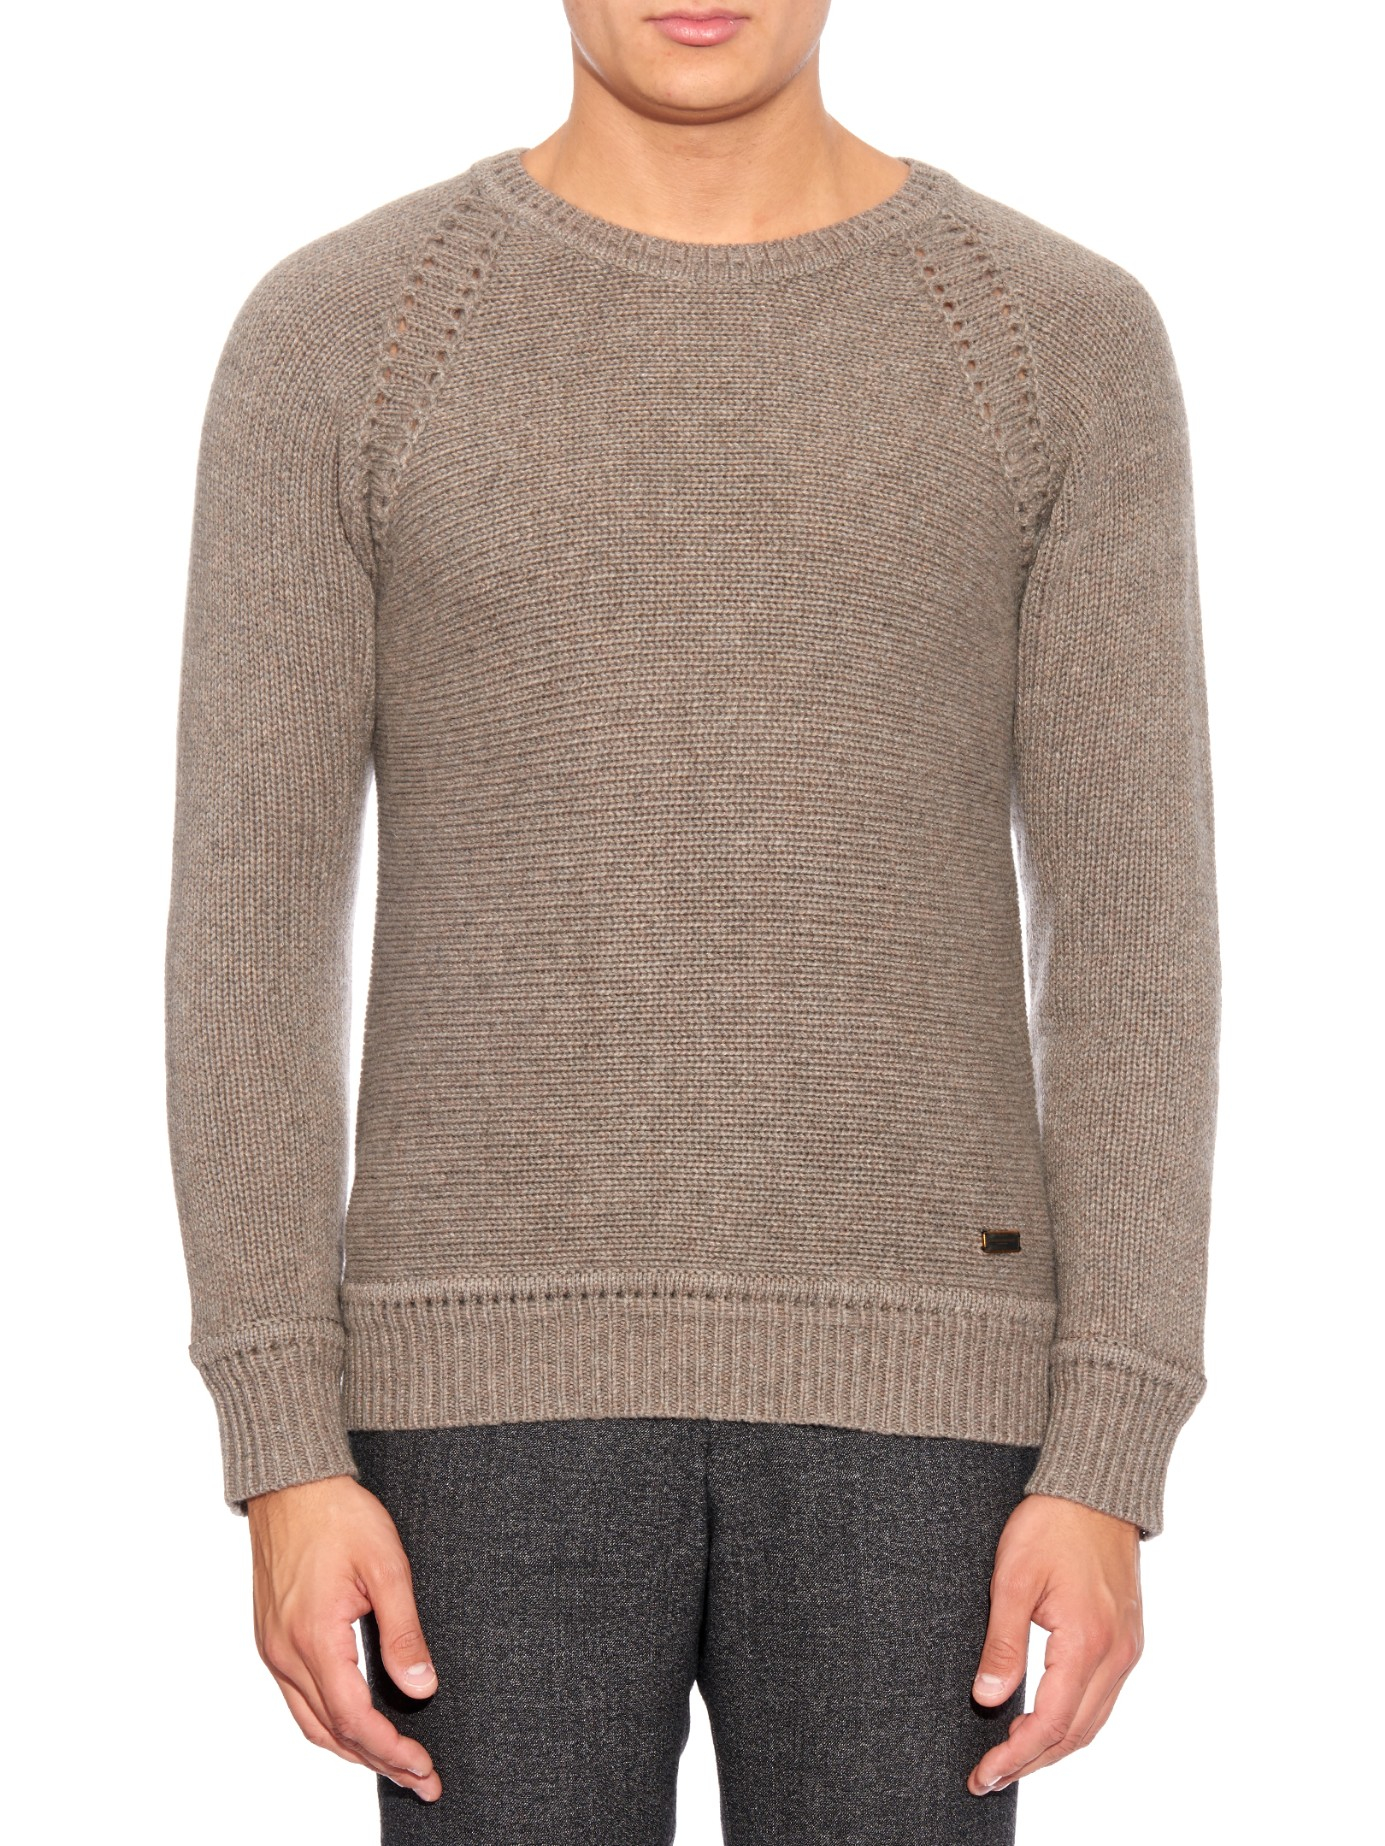 Lyst - Burberry Cashmere-knit Crew Neck Sweater in Natural for Men